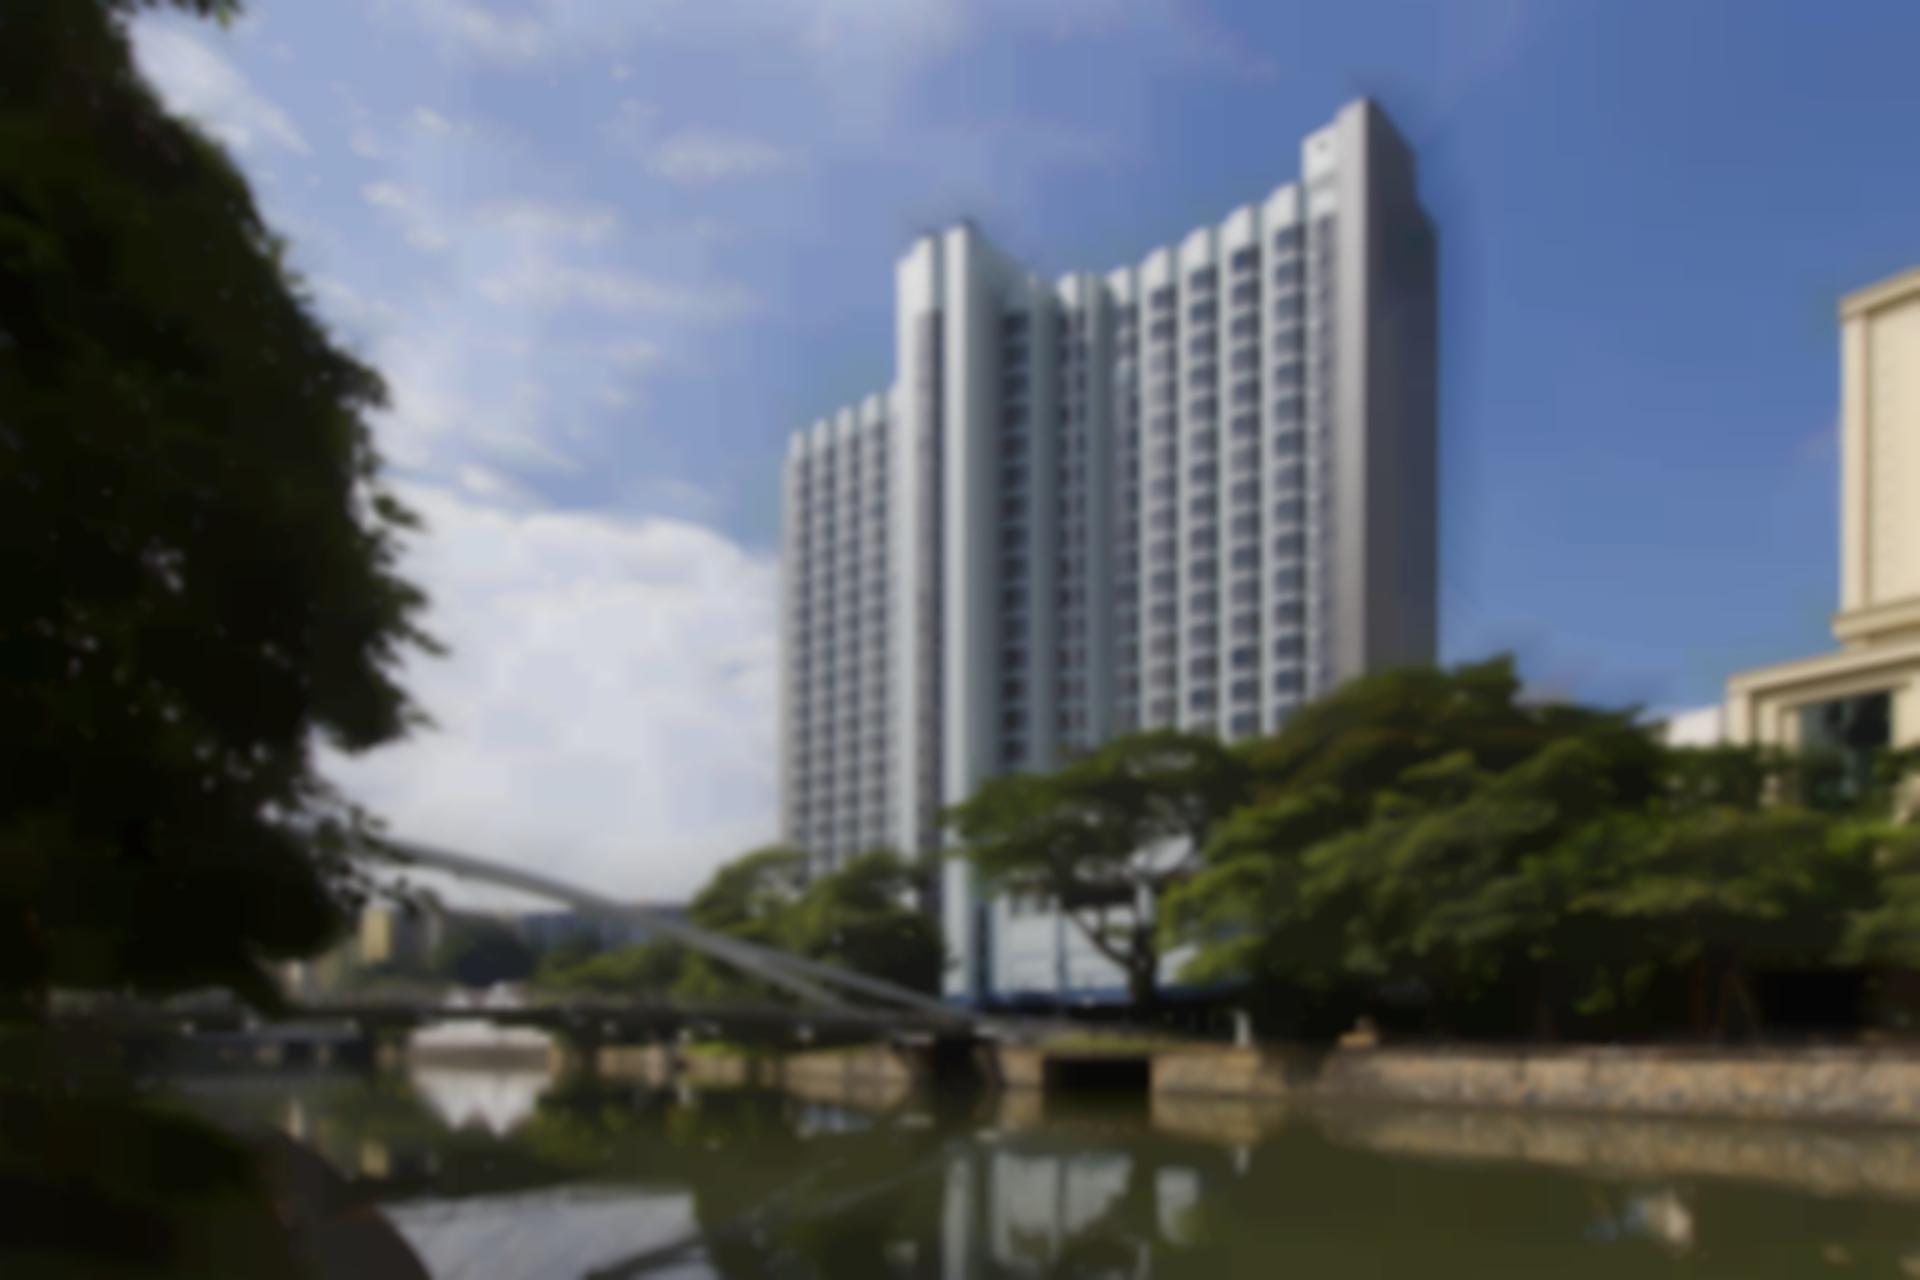 Four Points by Sheraton Singapore, Riverview